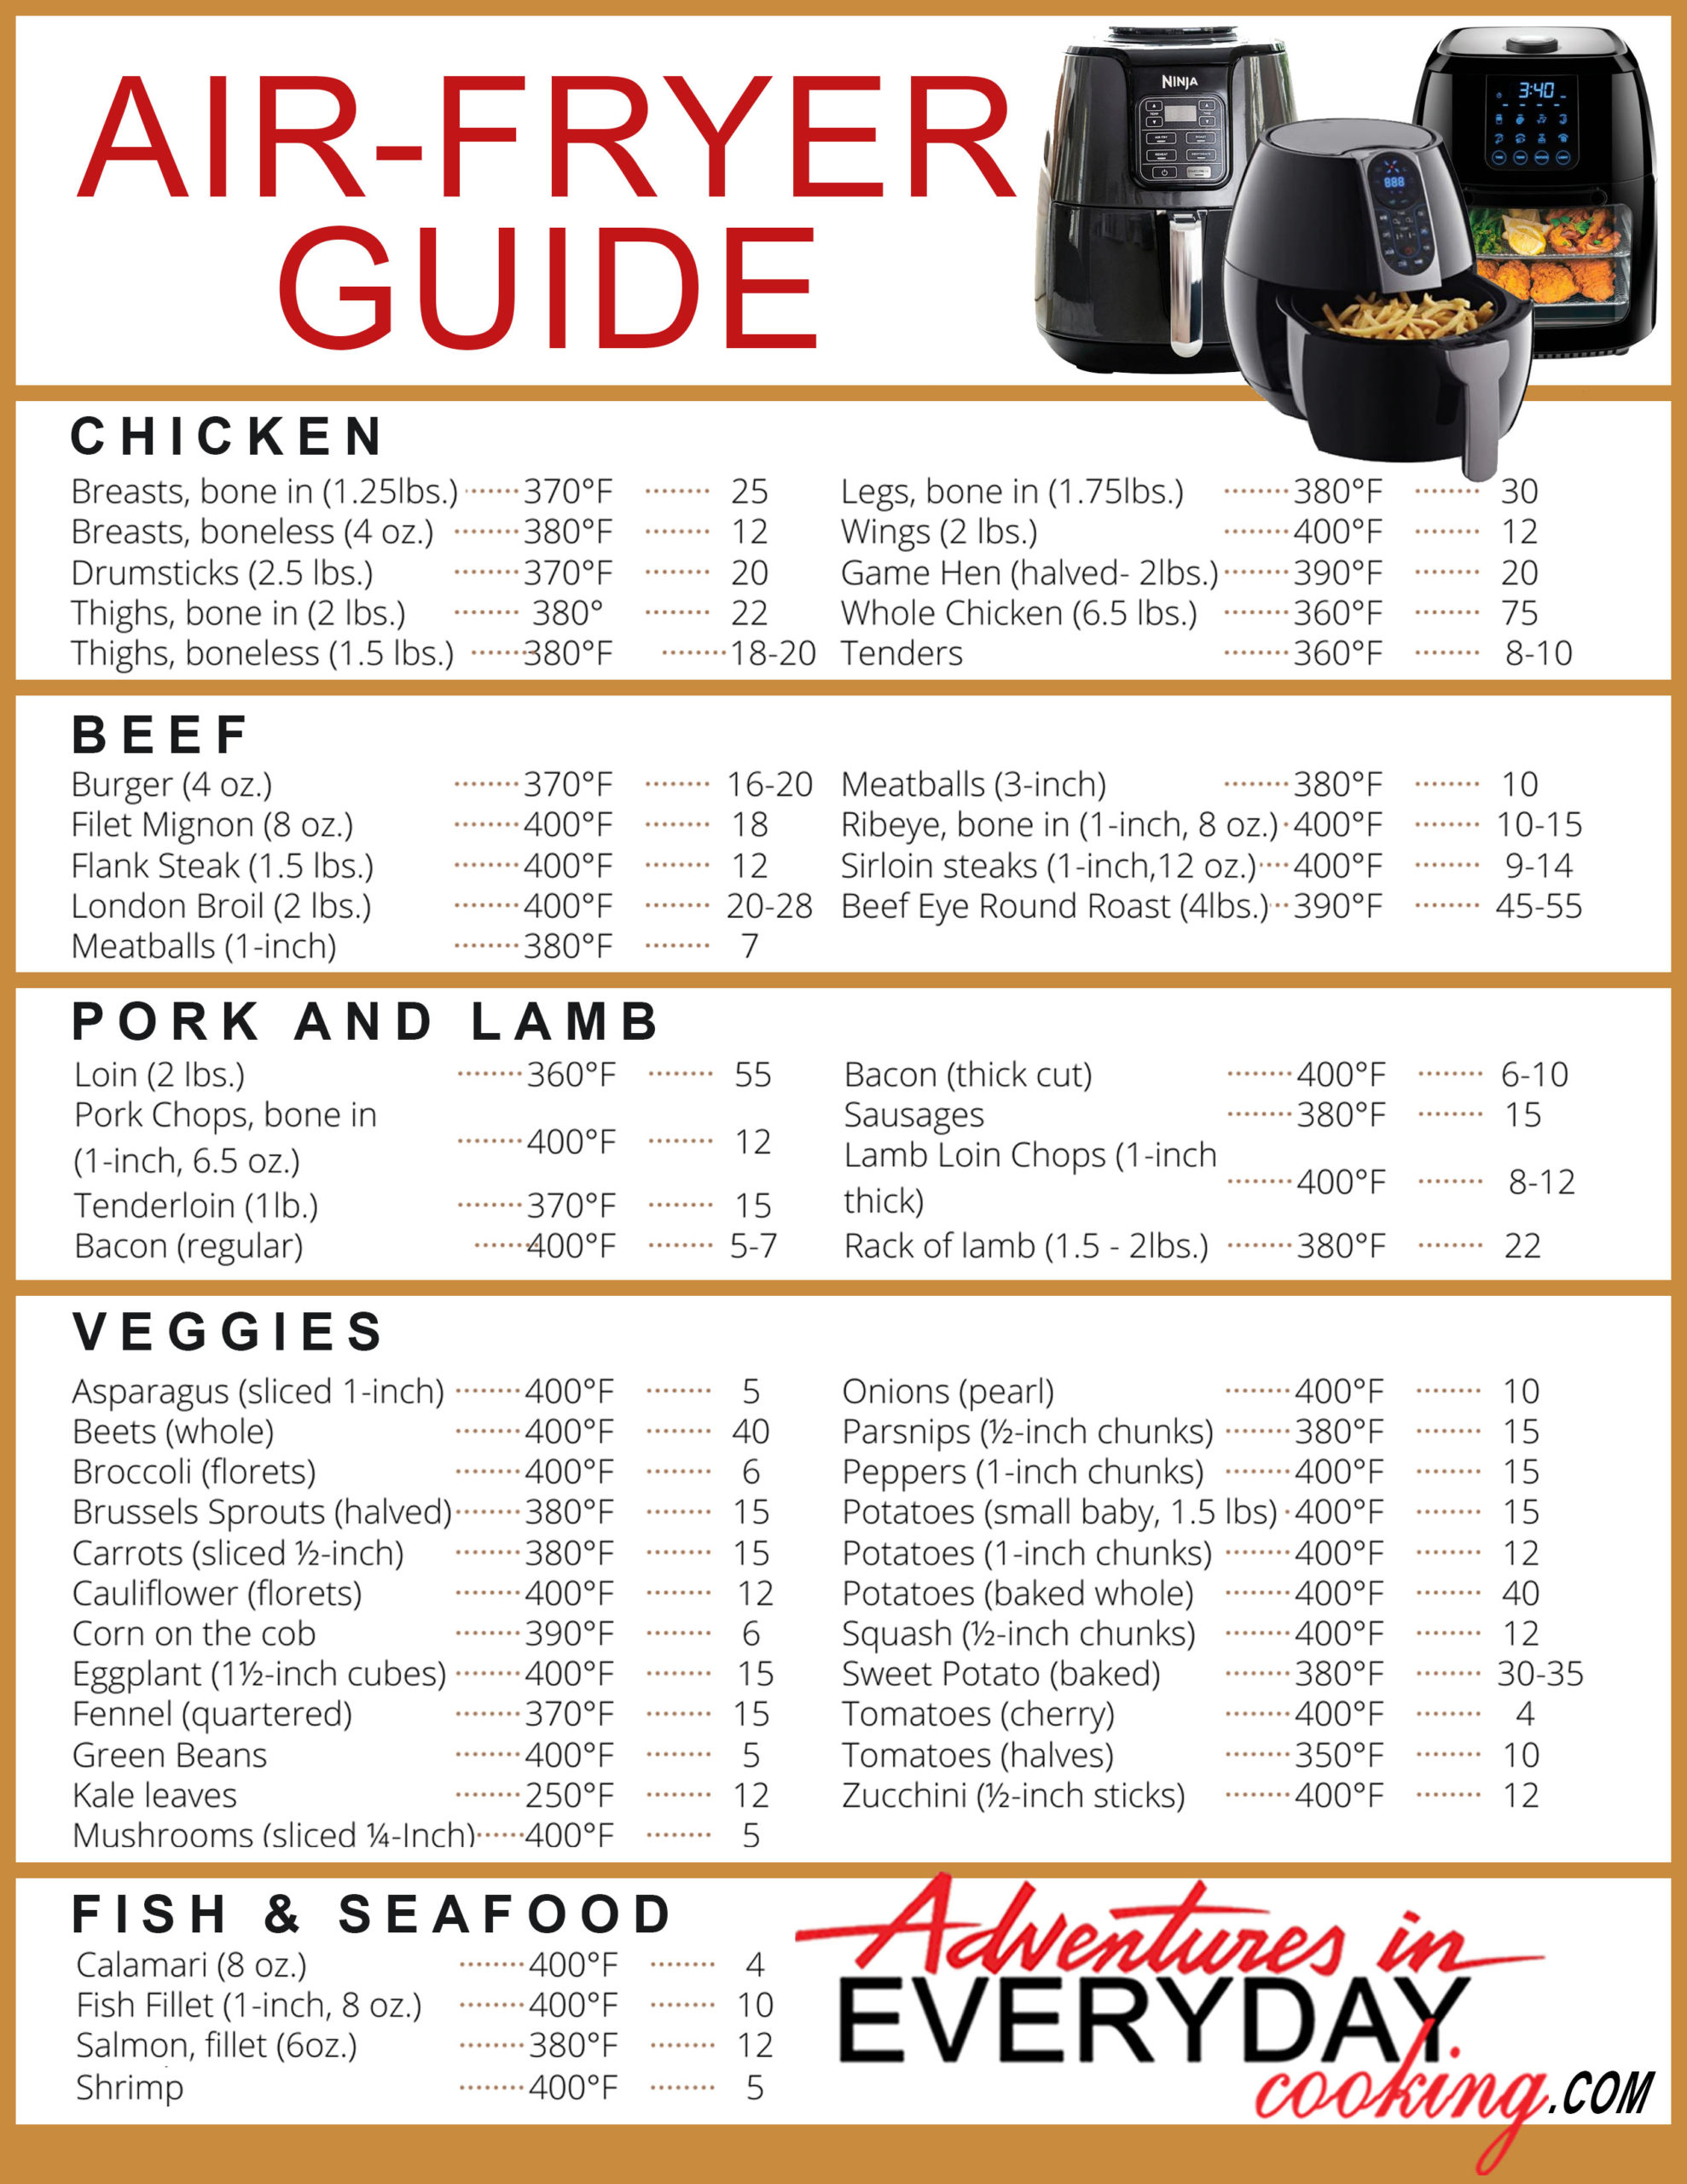 air-fryer-cheat-sheet-adventures-in-everyday-cooking